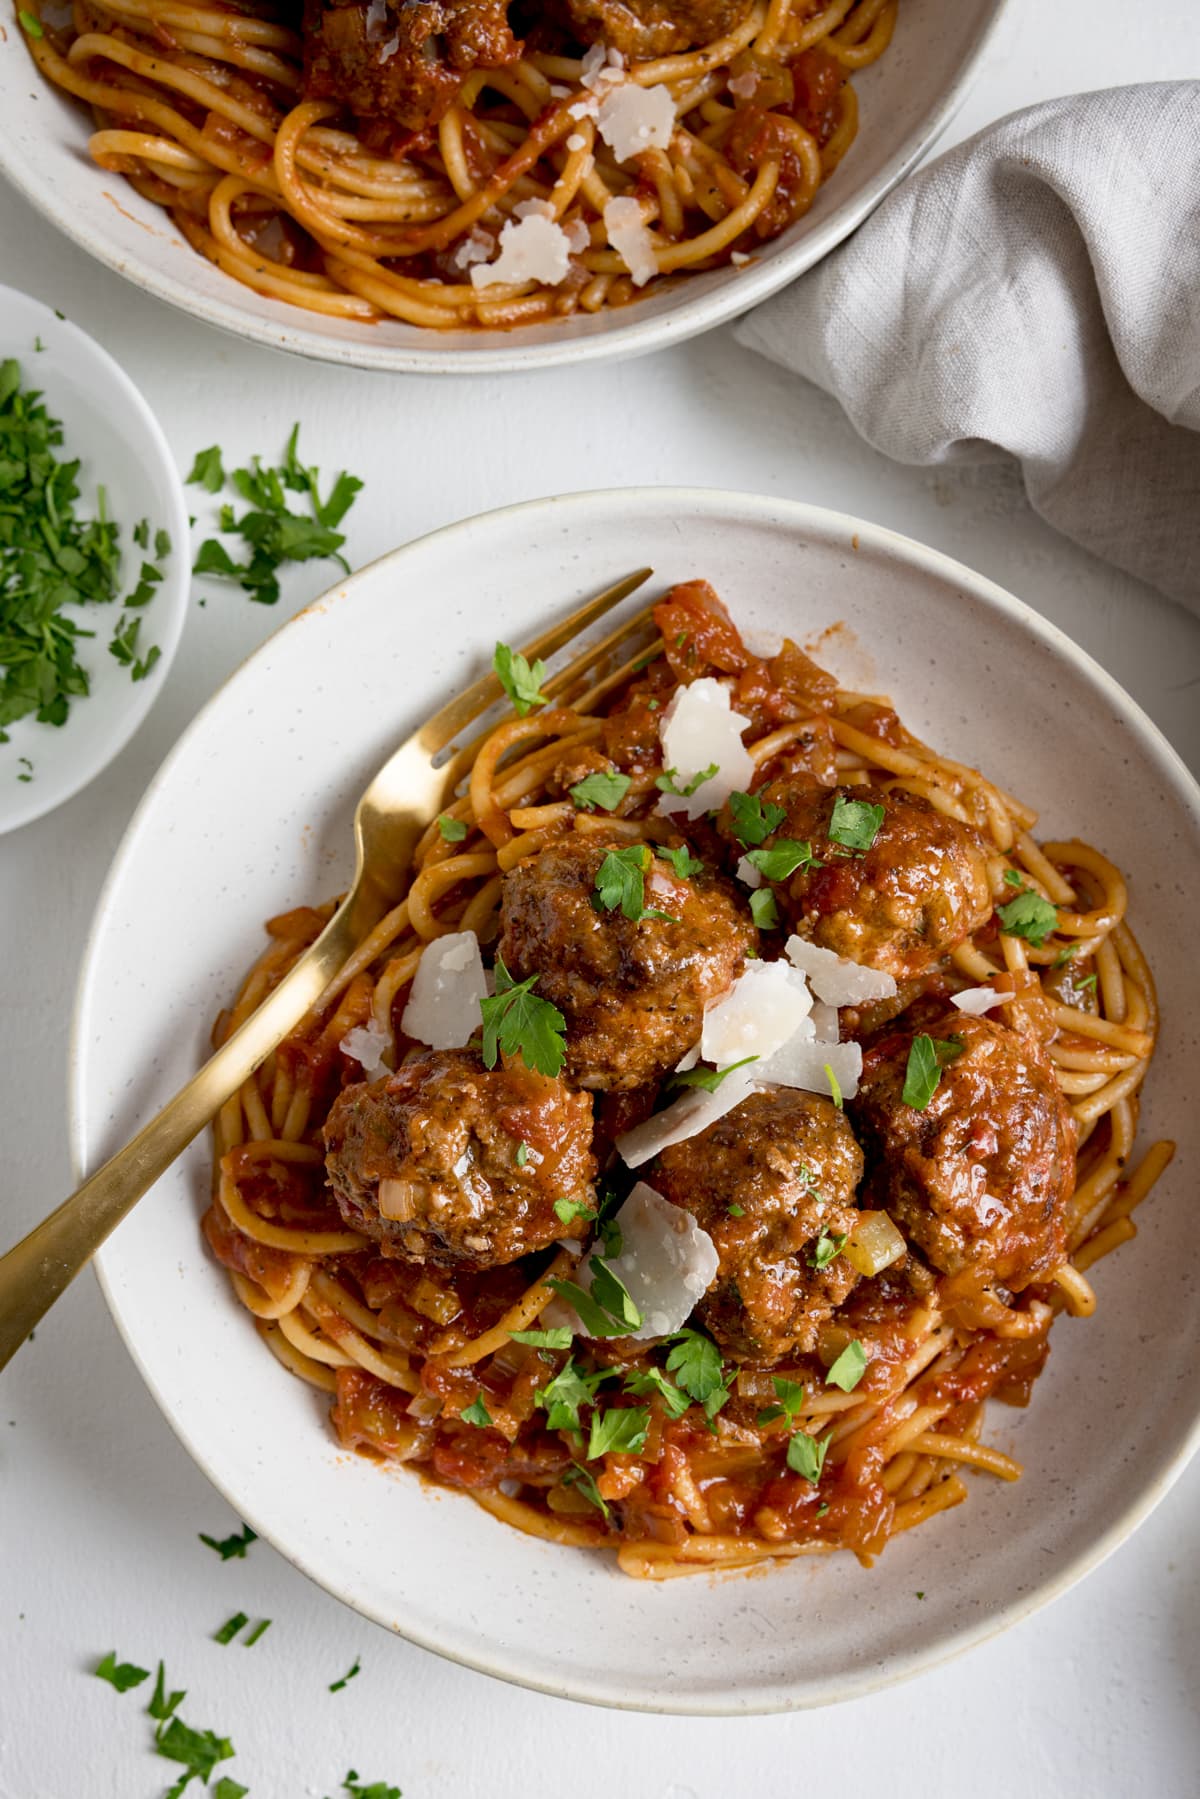 Spaghetti and meatballs in tomato sauce in a white bowl on a white background. There is a gold fork in the bowl. There is a further bowl of spaghetti and meatballs just in shot at the top of the frame.